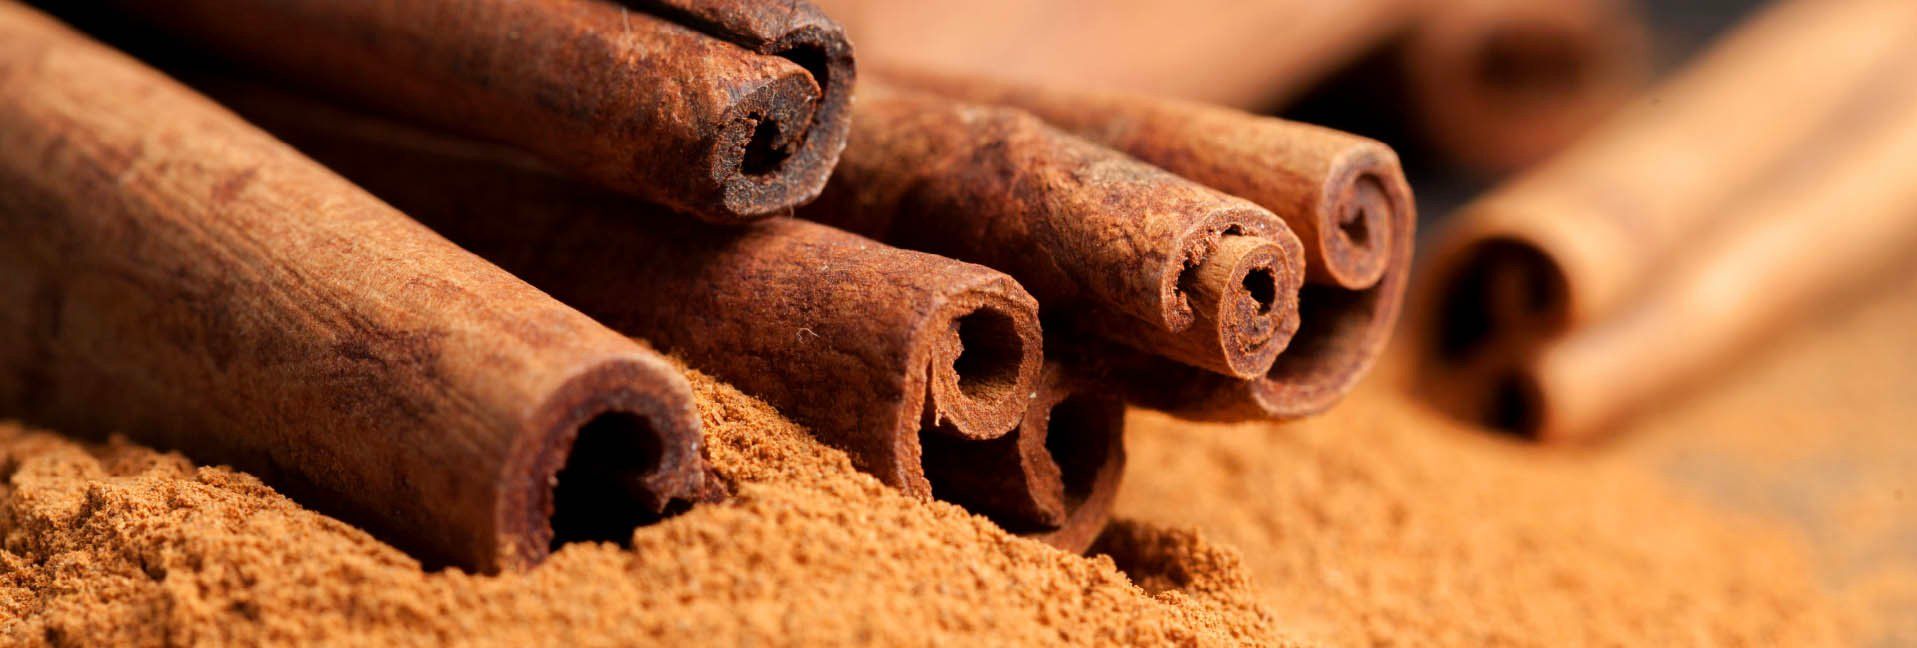 The Bark With A Bite, Cinnamon’s amazing uses around the homestead